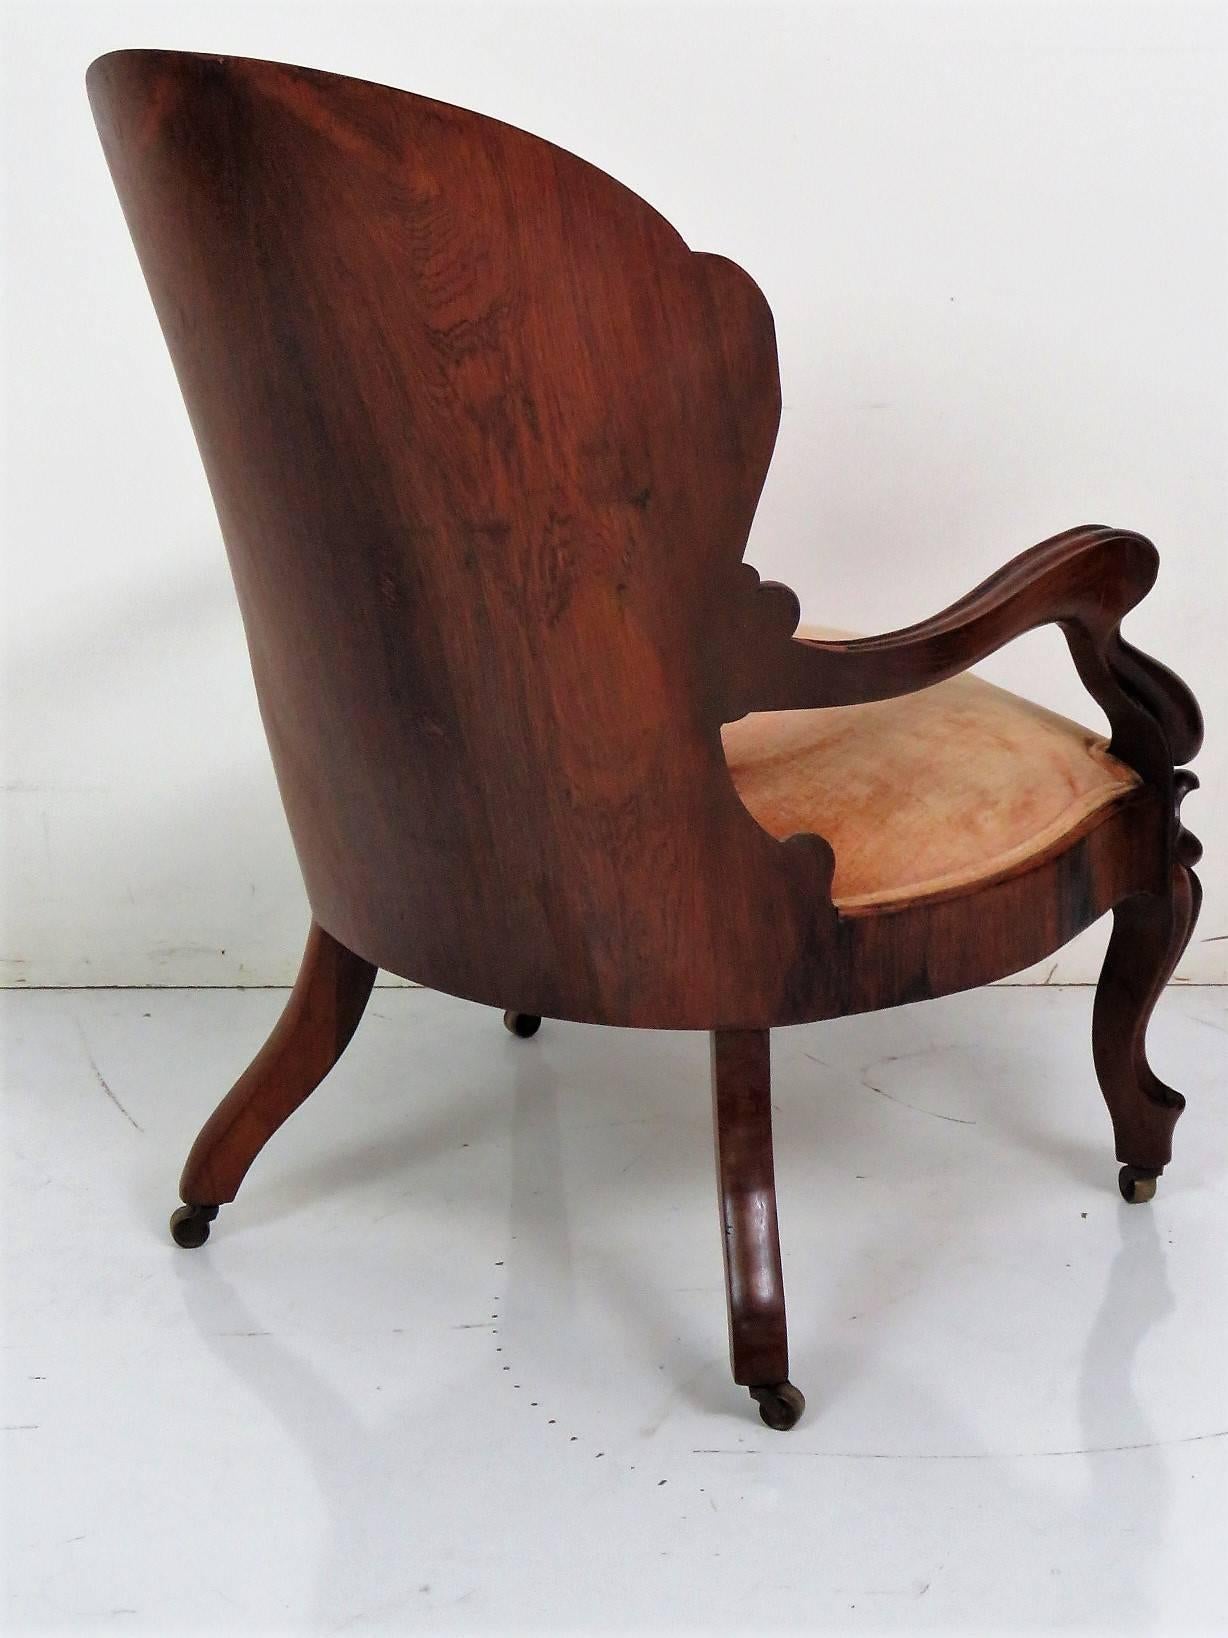 Walnut laminate frame. Orange upholstery. Would look great matched with our gentleman's chair VMD1361.